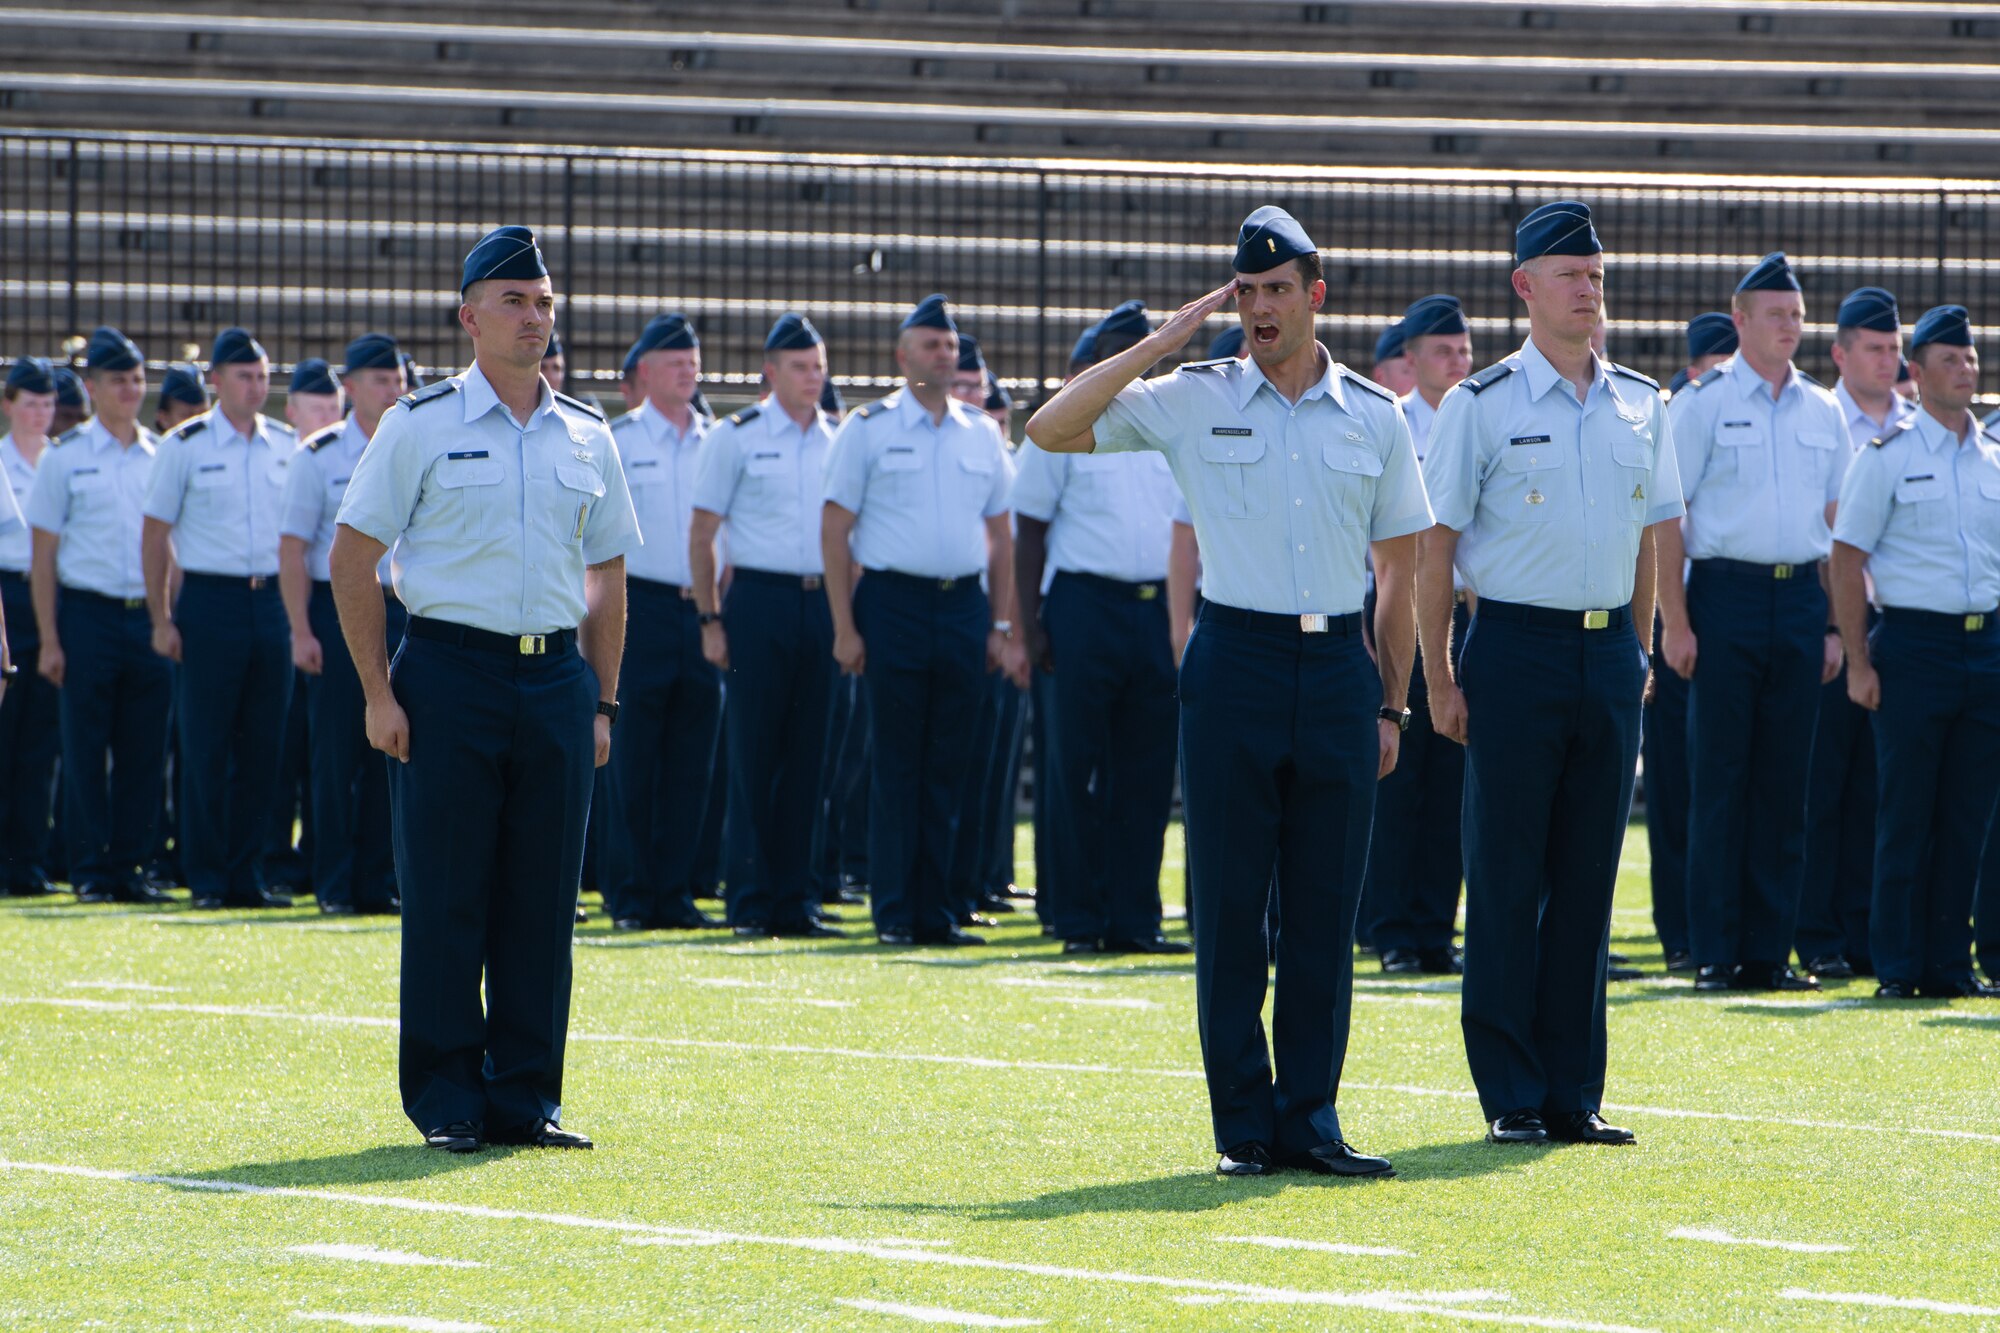 A newly commissioned officer a part of the Air Force’s Officer Training School class 19-07 participates in the graduation ceremony Sept. 27, 2019, in Montgomery, Alabama. The OTS graduation parade and ceremony signifies the end of the trainee’s initial officer training and the beginning of their career as an Air Force officer. (U.S. Air Force photo by Airman 1st Class Charles Welty)